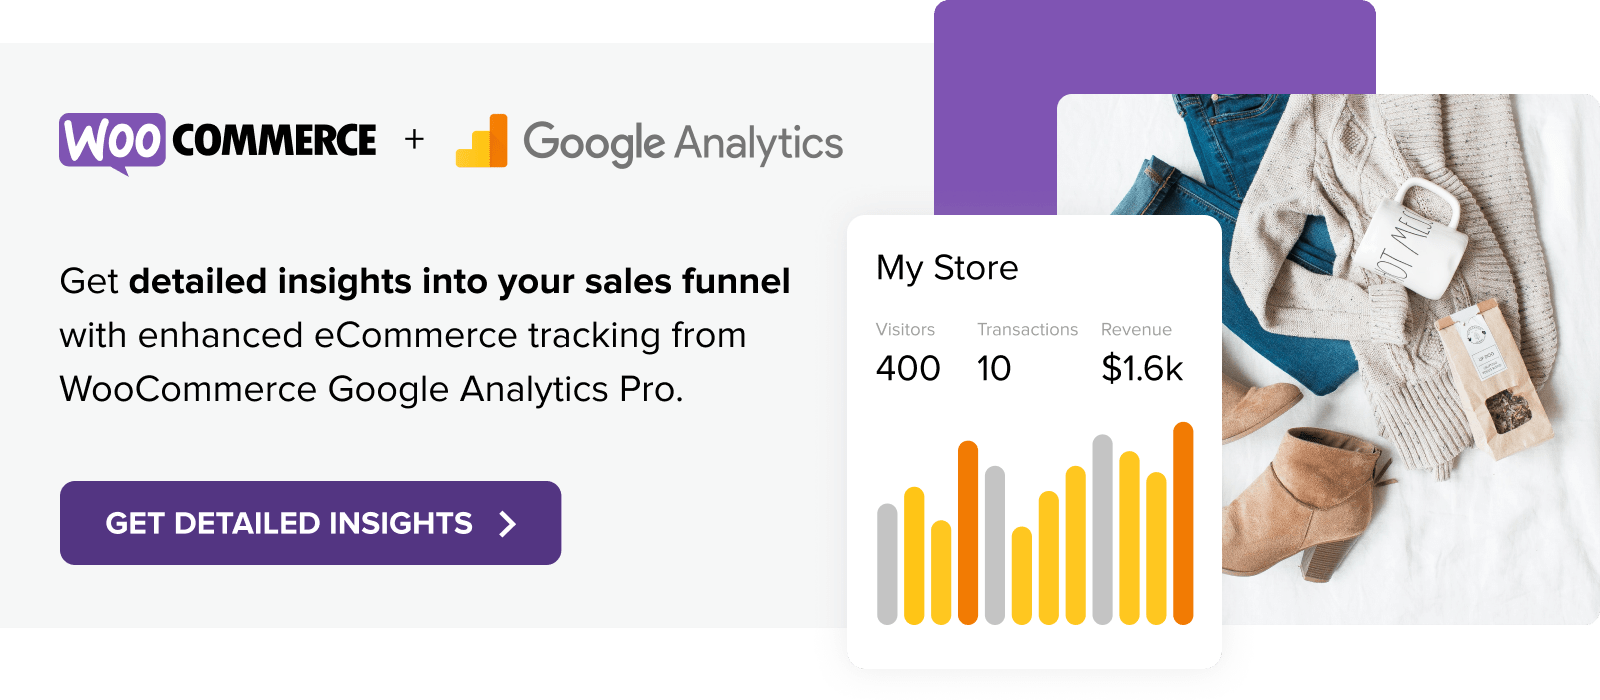 Get detailed insights into you sales funnel with Google Analytics Pro